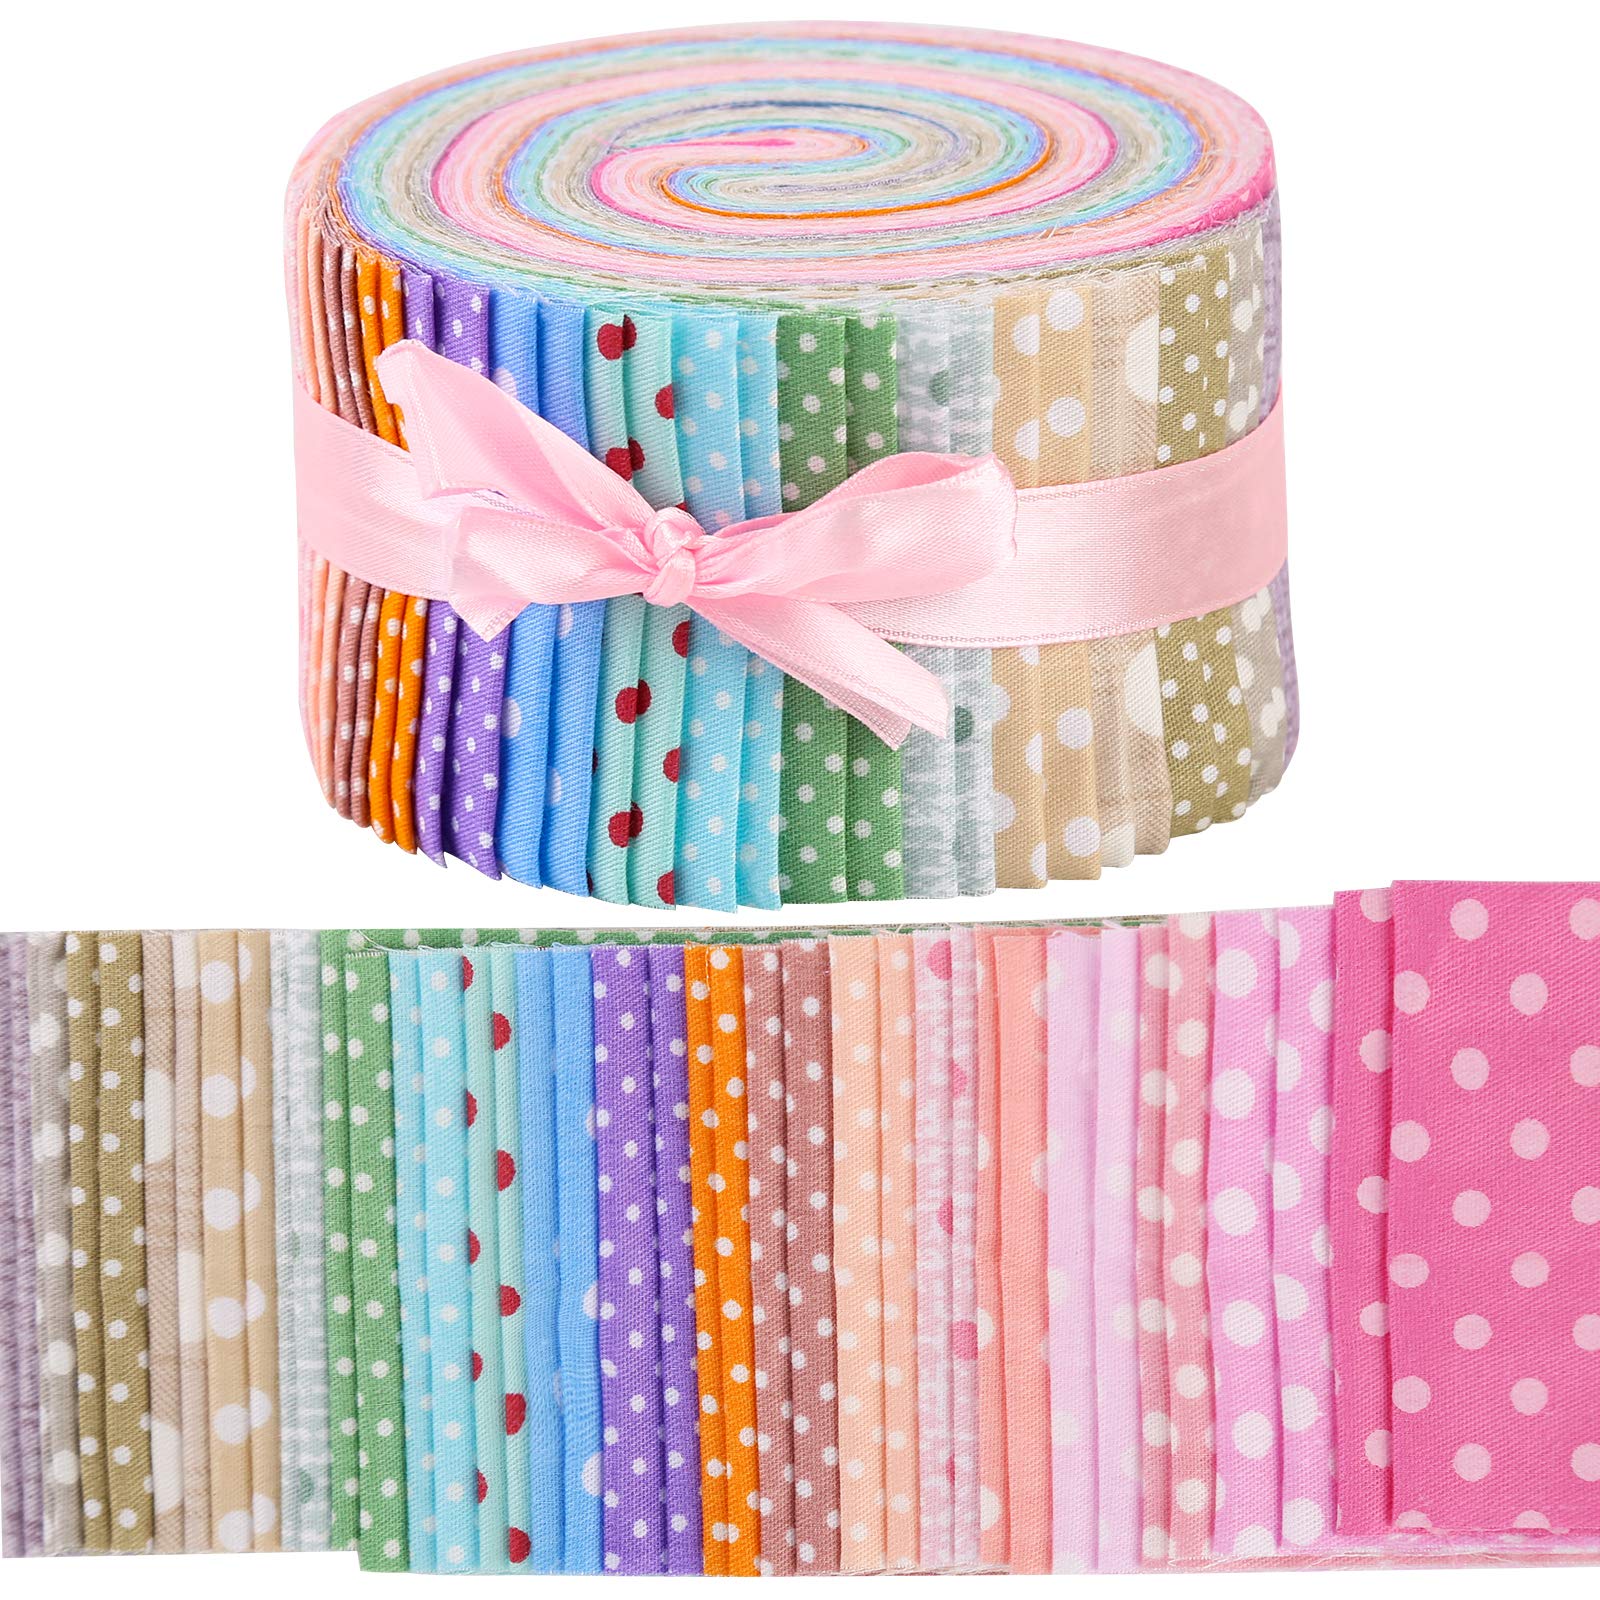 Jelly Roll Fabric, Roll Up Cotton Fabric Quilting Strips, Jelly Roll Fabric Strips for Quilting, Patchwork Craft Cotton Quilting Fabric, Patchwork Fabric Sets with Different Patterns